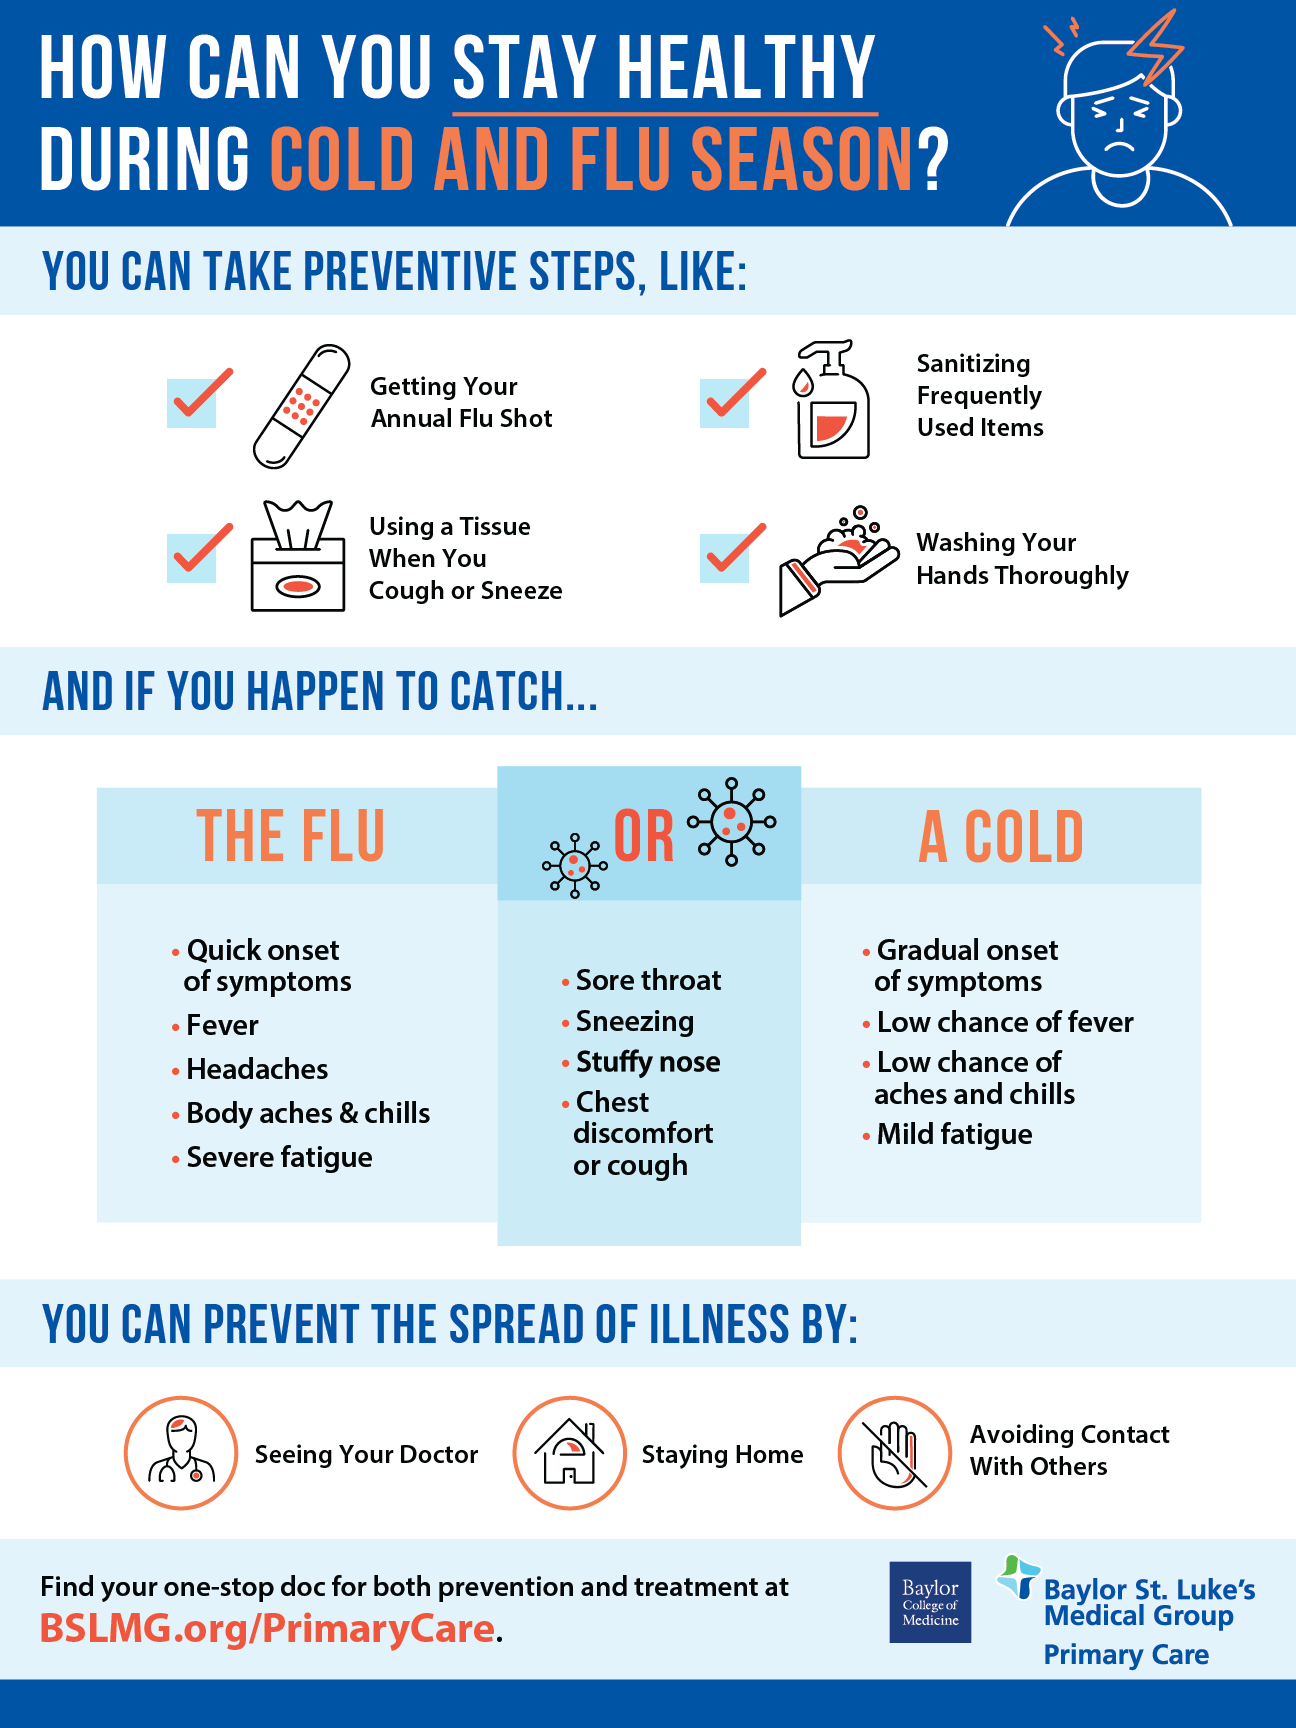 Cold & Flu Season Prevention and Recovery Tips St. Luke's Health